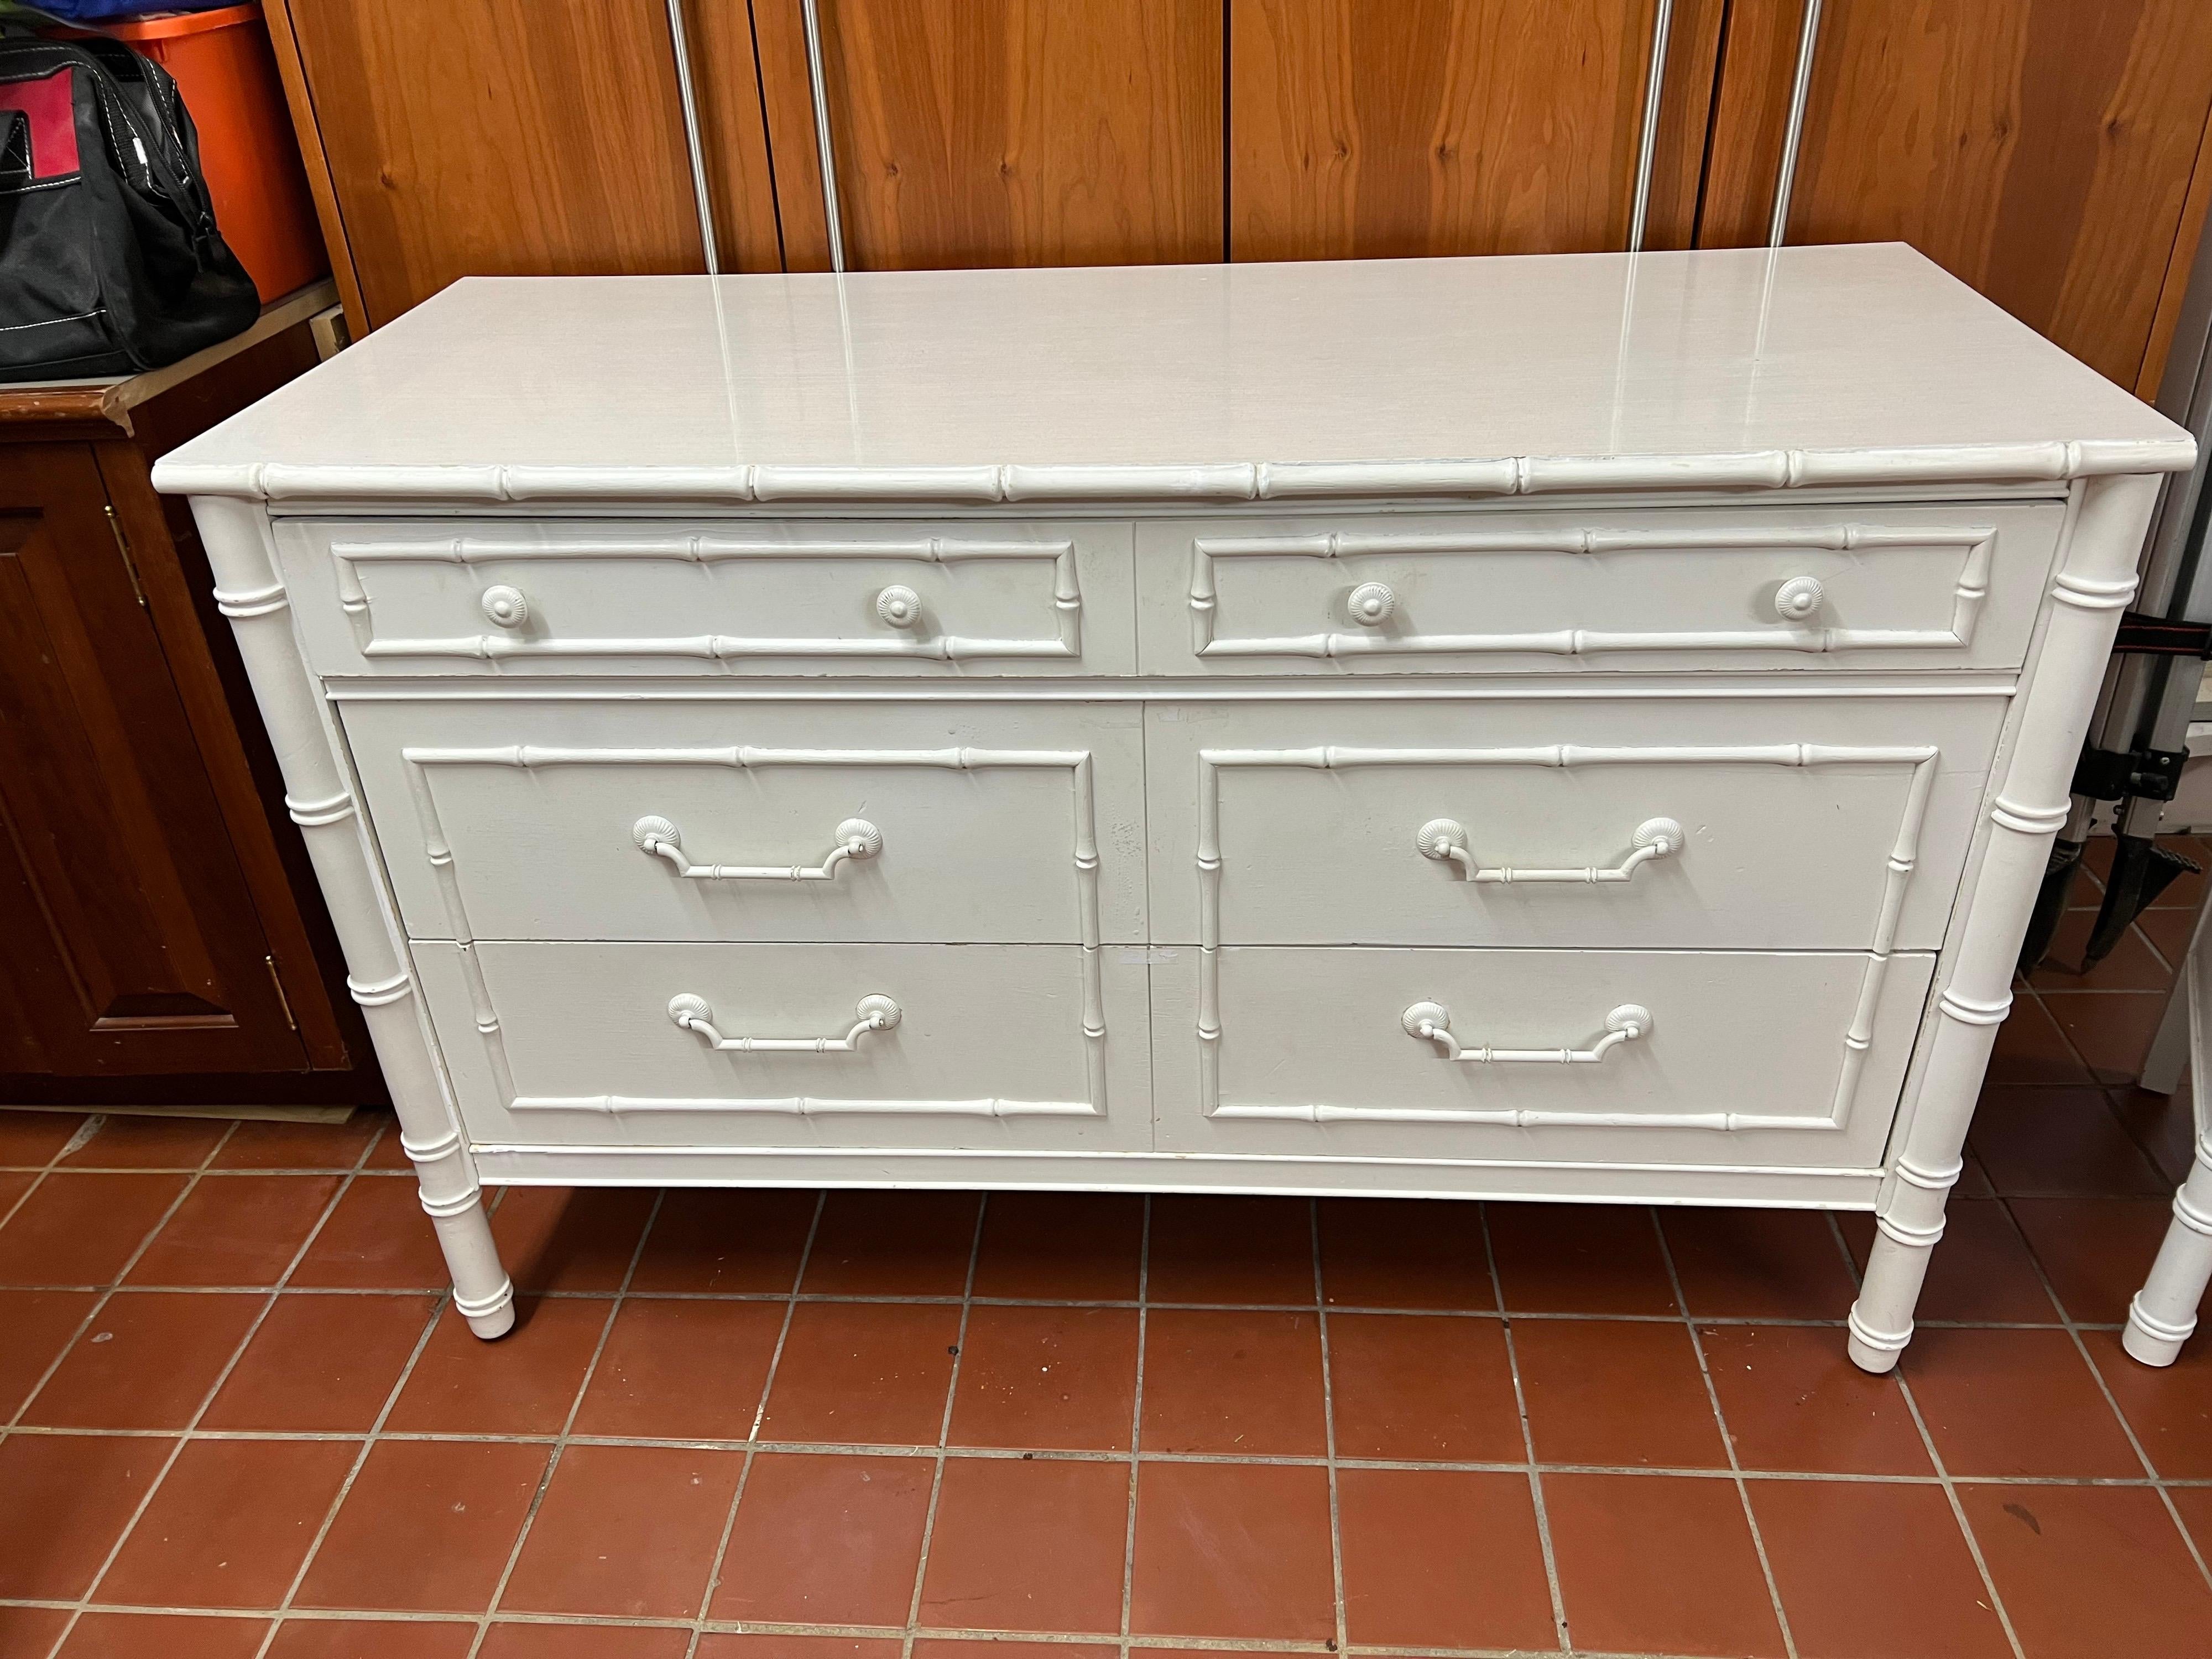 Vintage Thomasville Allegro Style Chest of Drawers. Classic Faux Bamboo design with timeless coastal appeal. Three full drawers make up this attractive storage piece. 
Use as a dresser or a small credenza for storage.
In the style of Thomasville